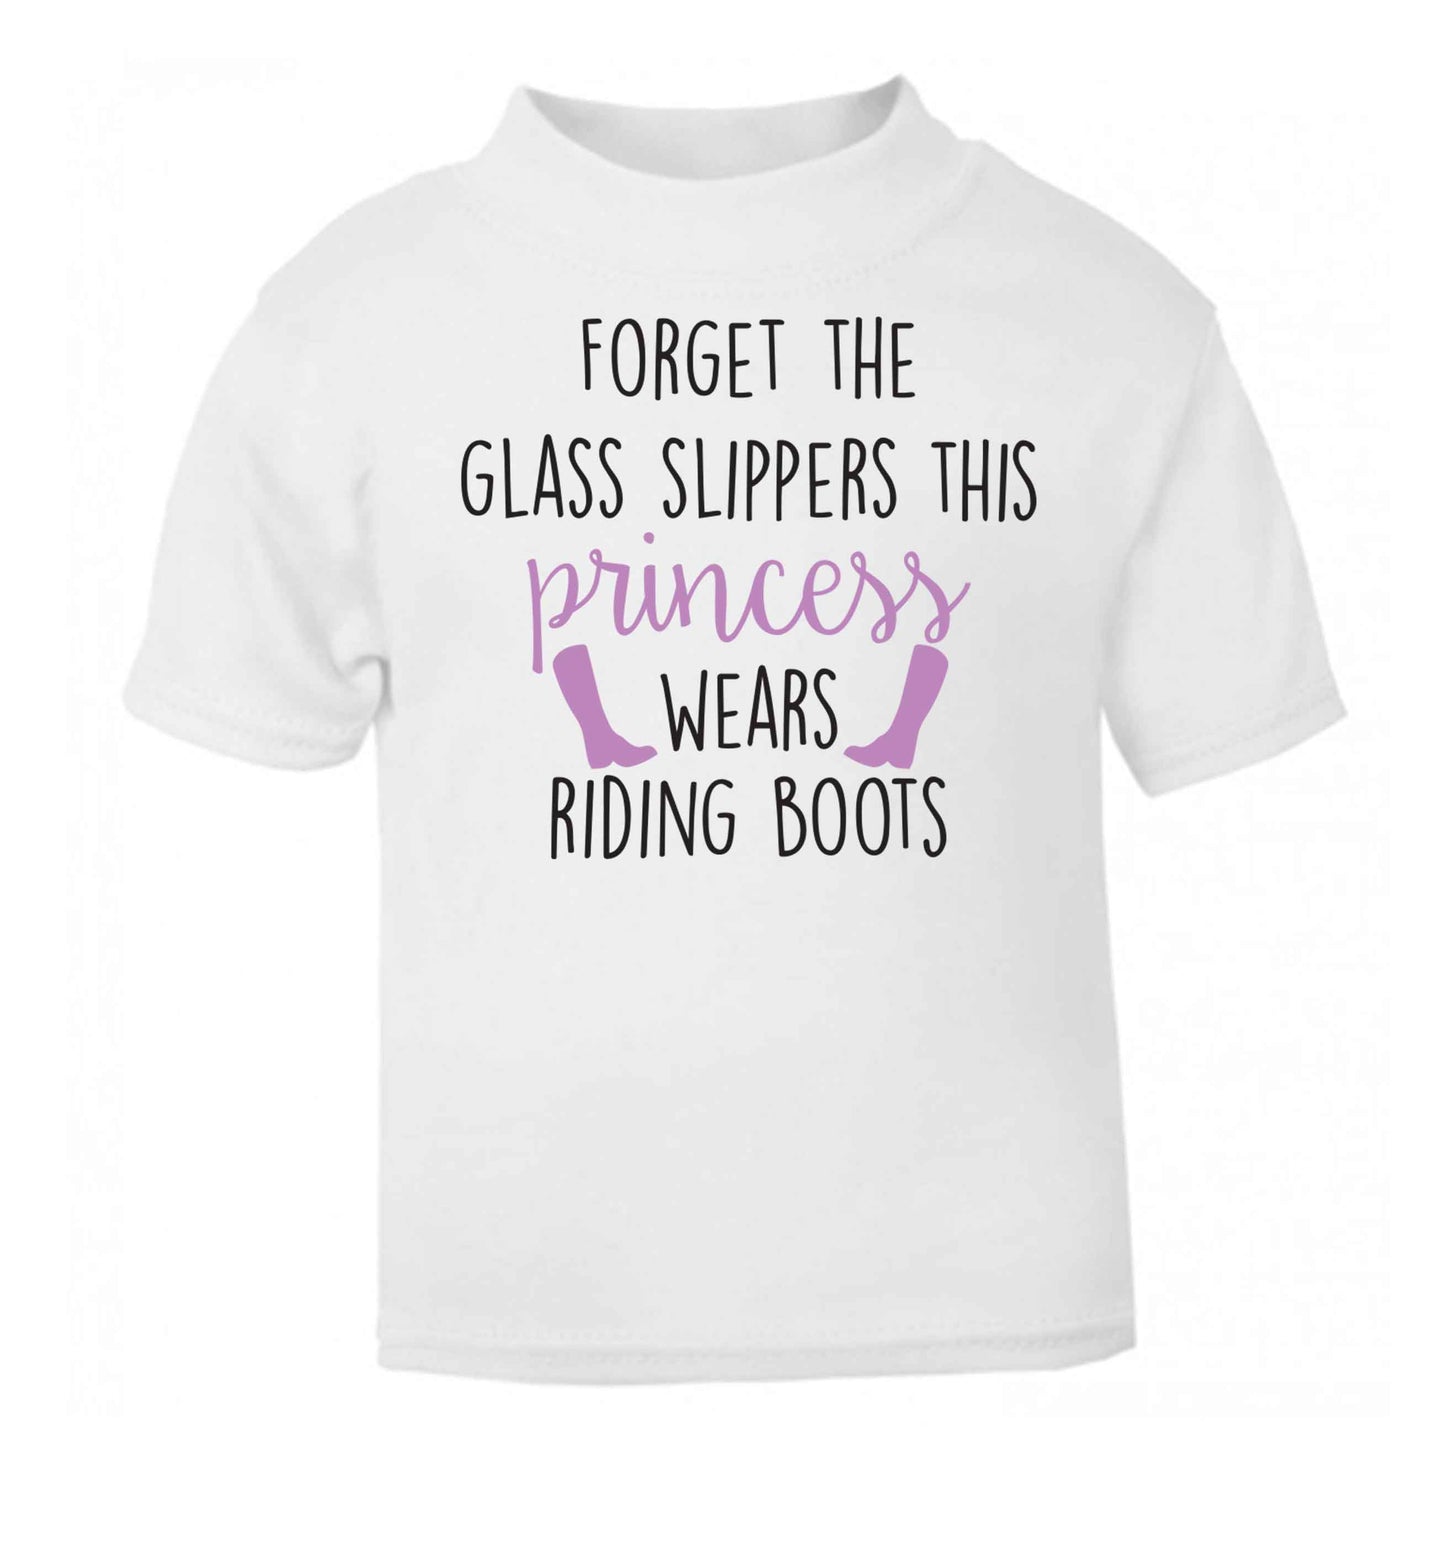 Forget the glass slippers this princess wears riding boots white baby toddler Tshirt 2 Years